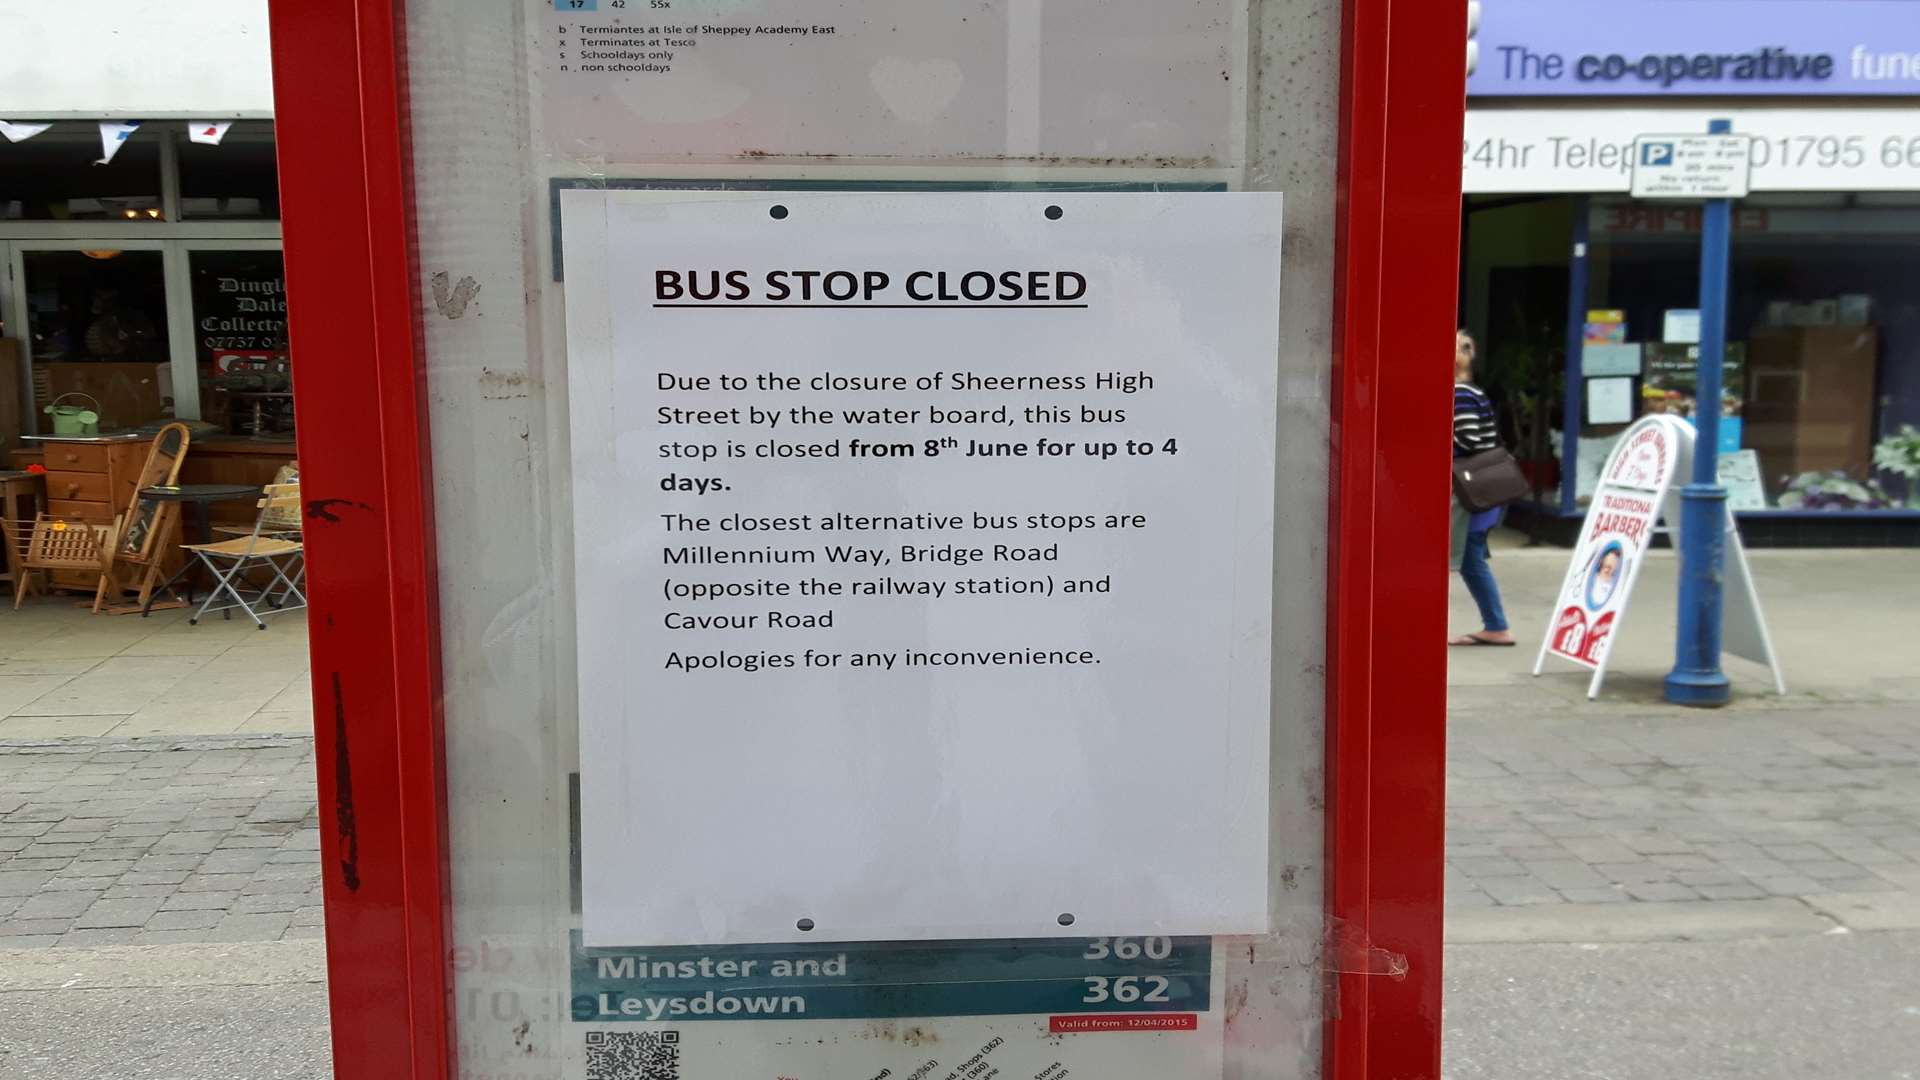 The closure sign on the bus stop in Sheerness High Street